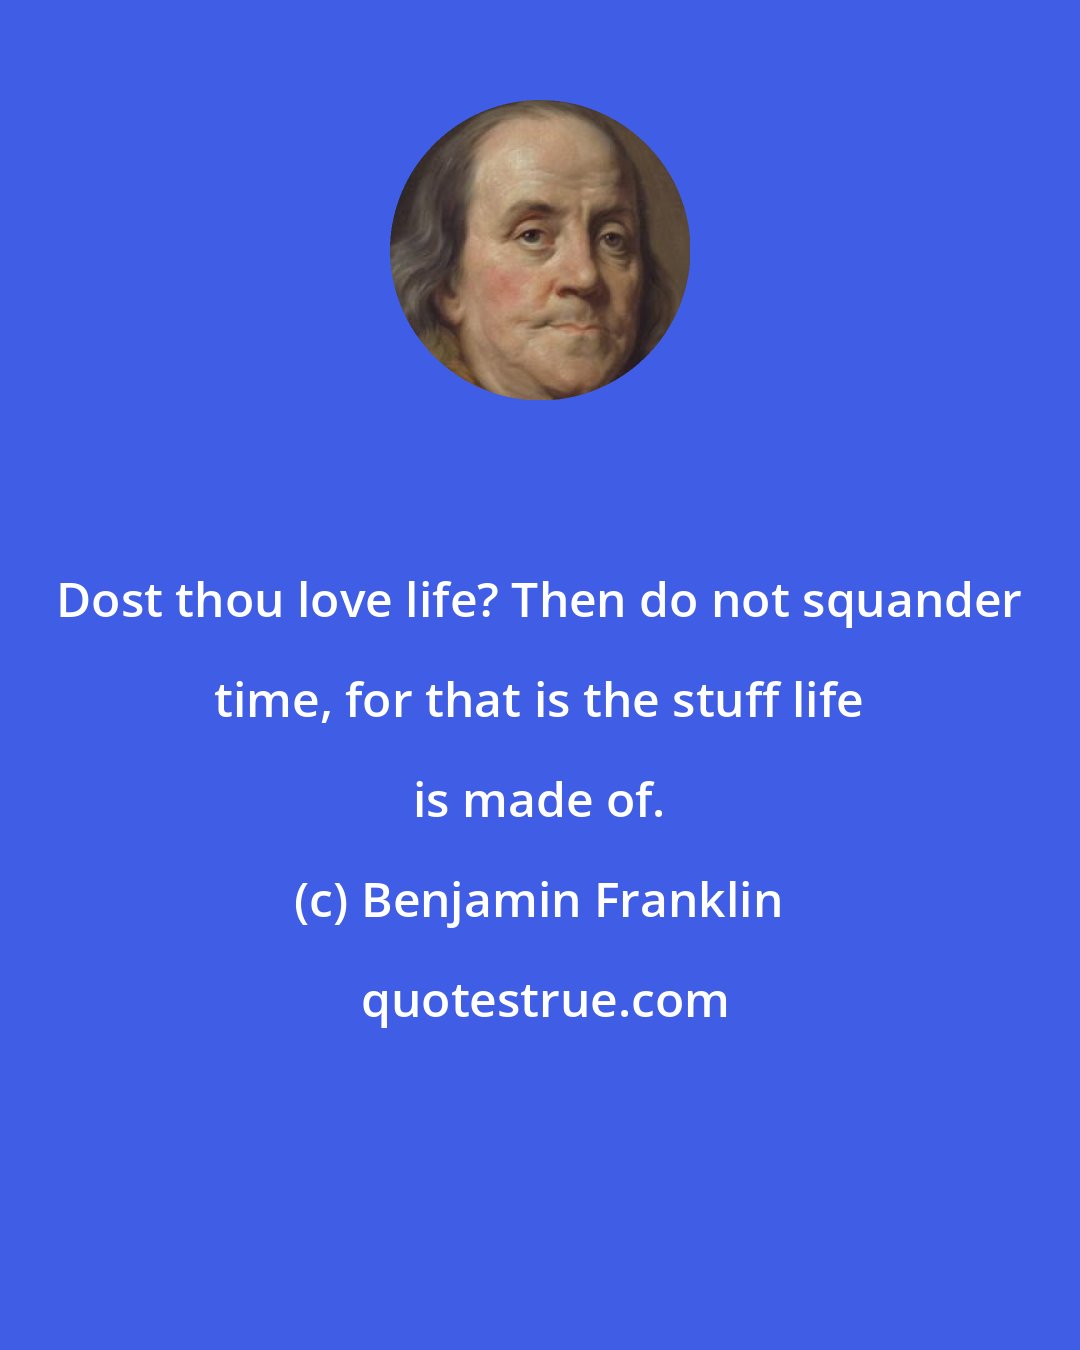 Benjamin Franklin: Dost thou love life? Then do not squander time, for that is the stuff life is made of.